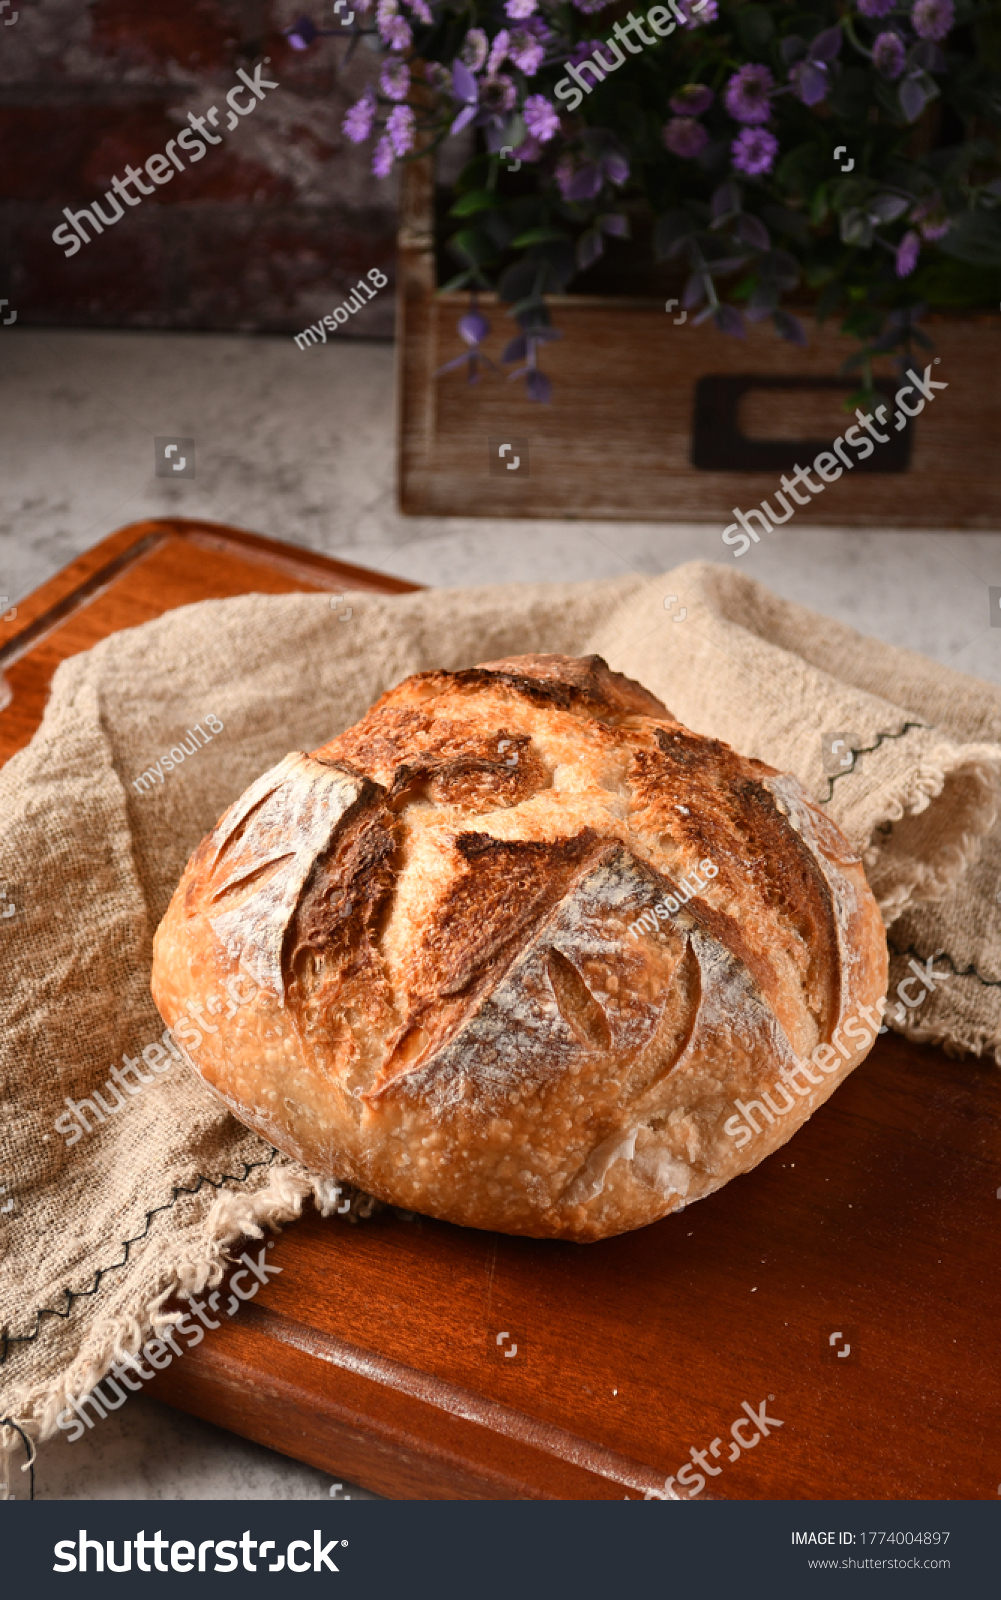 This is a Homemade Sourdough Boule bake by me.  This Boule is a giant round of crusty sourdough and the recipe uses Sourdough starter. It is much like Baguettes. #1774004897